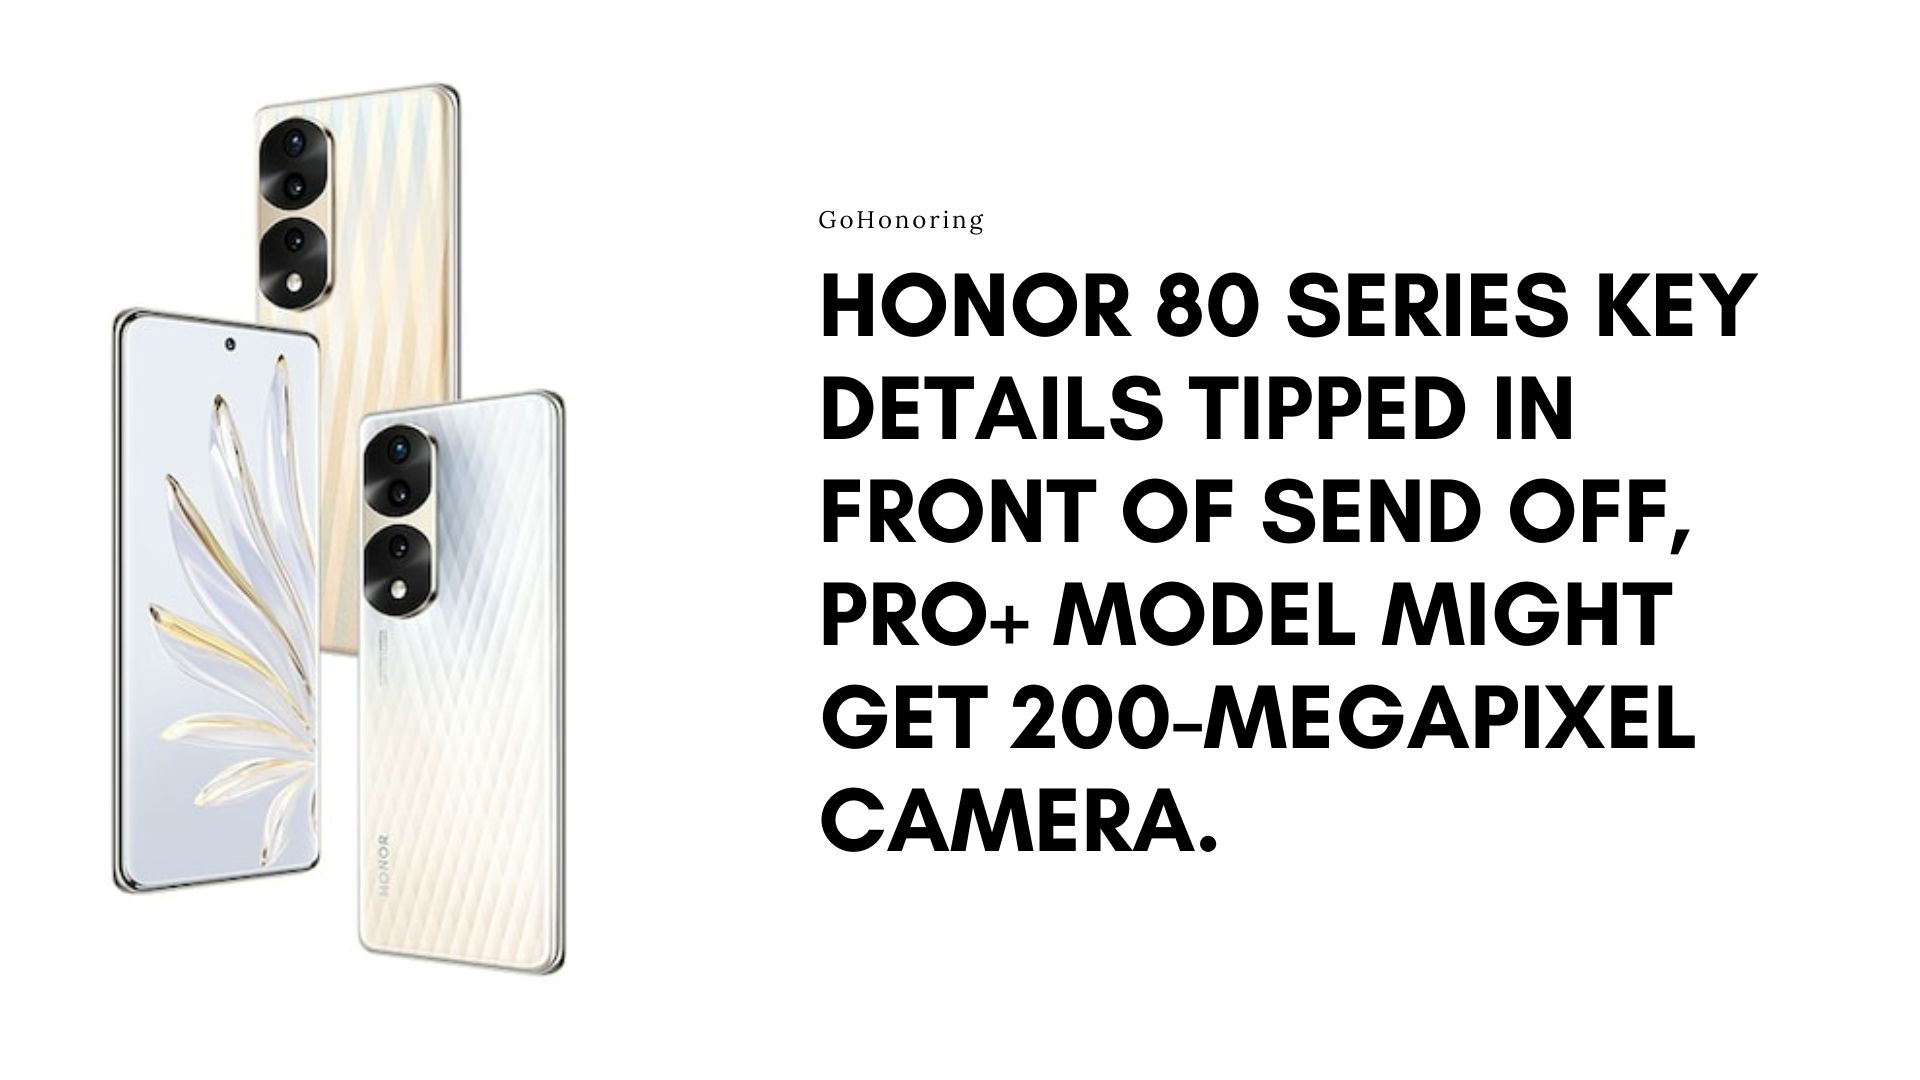 Honor 80 Series Key Details Tipped In front of Send off, Pro+ Model Might Get 200-Megapixel Camera. GoHonoring